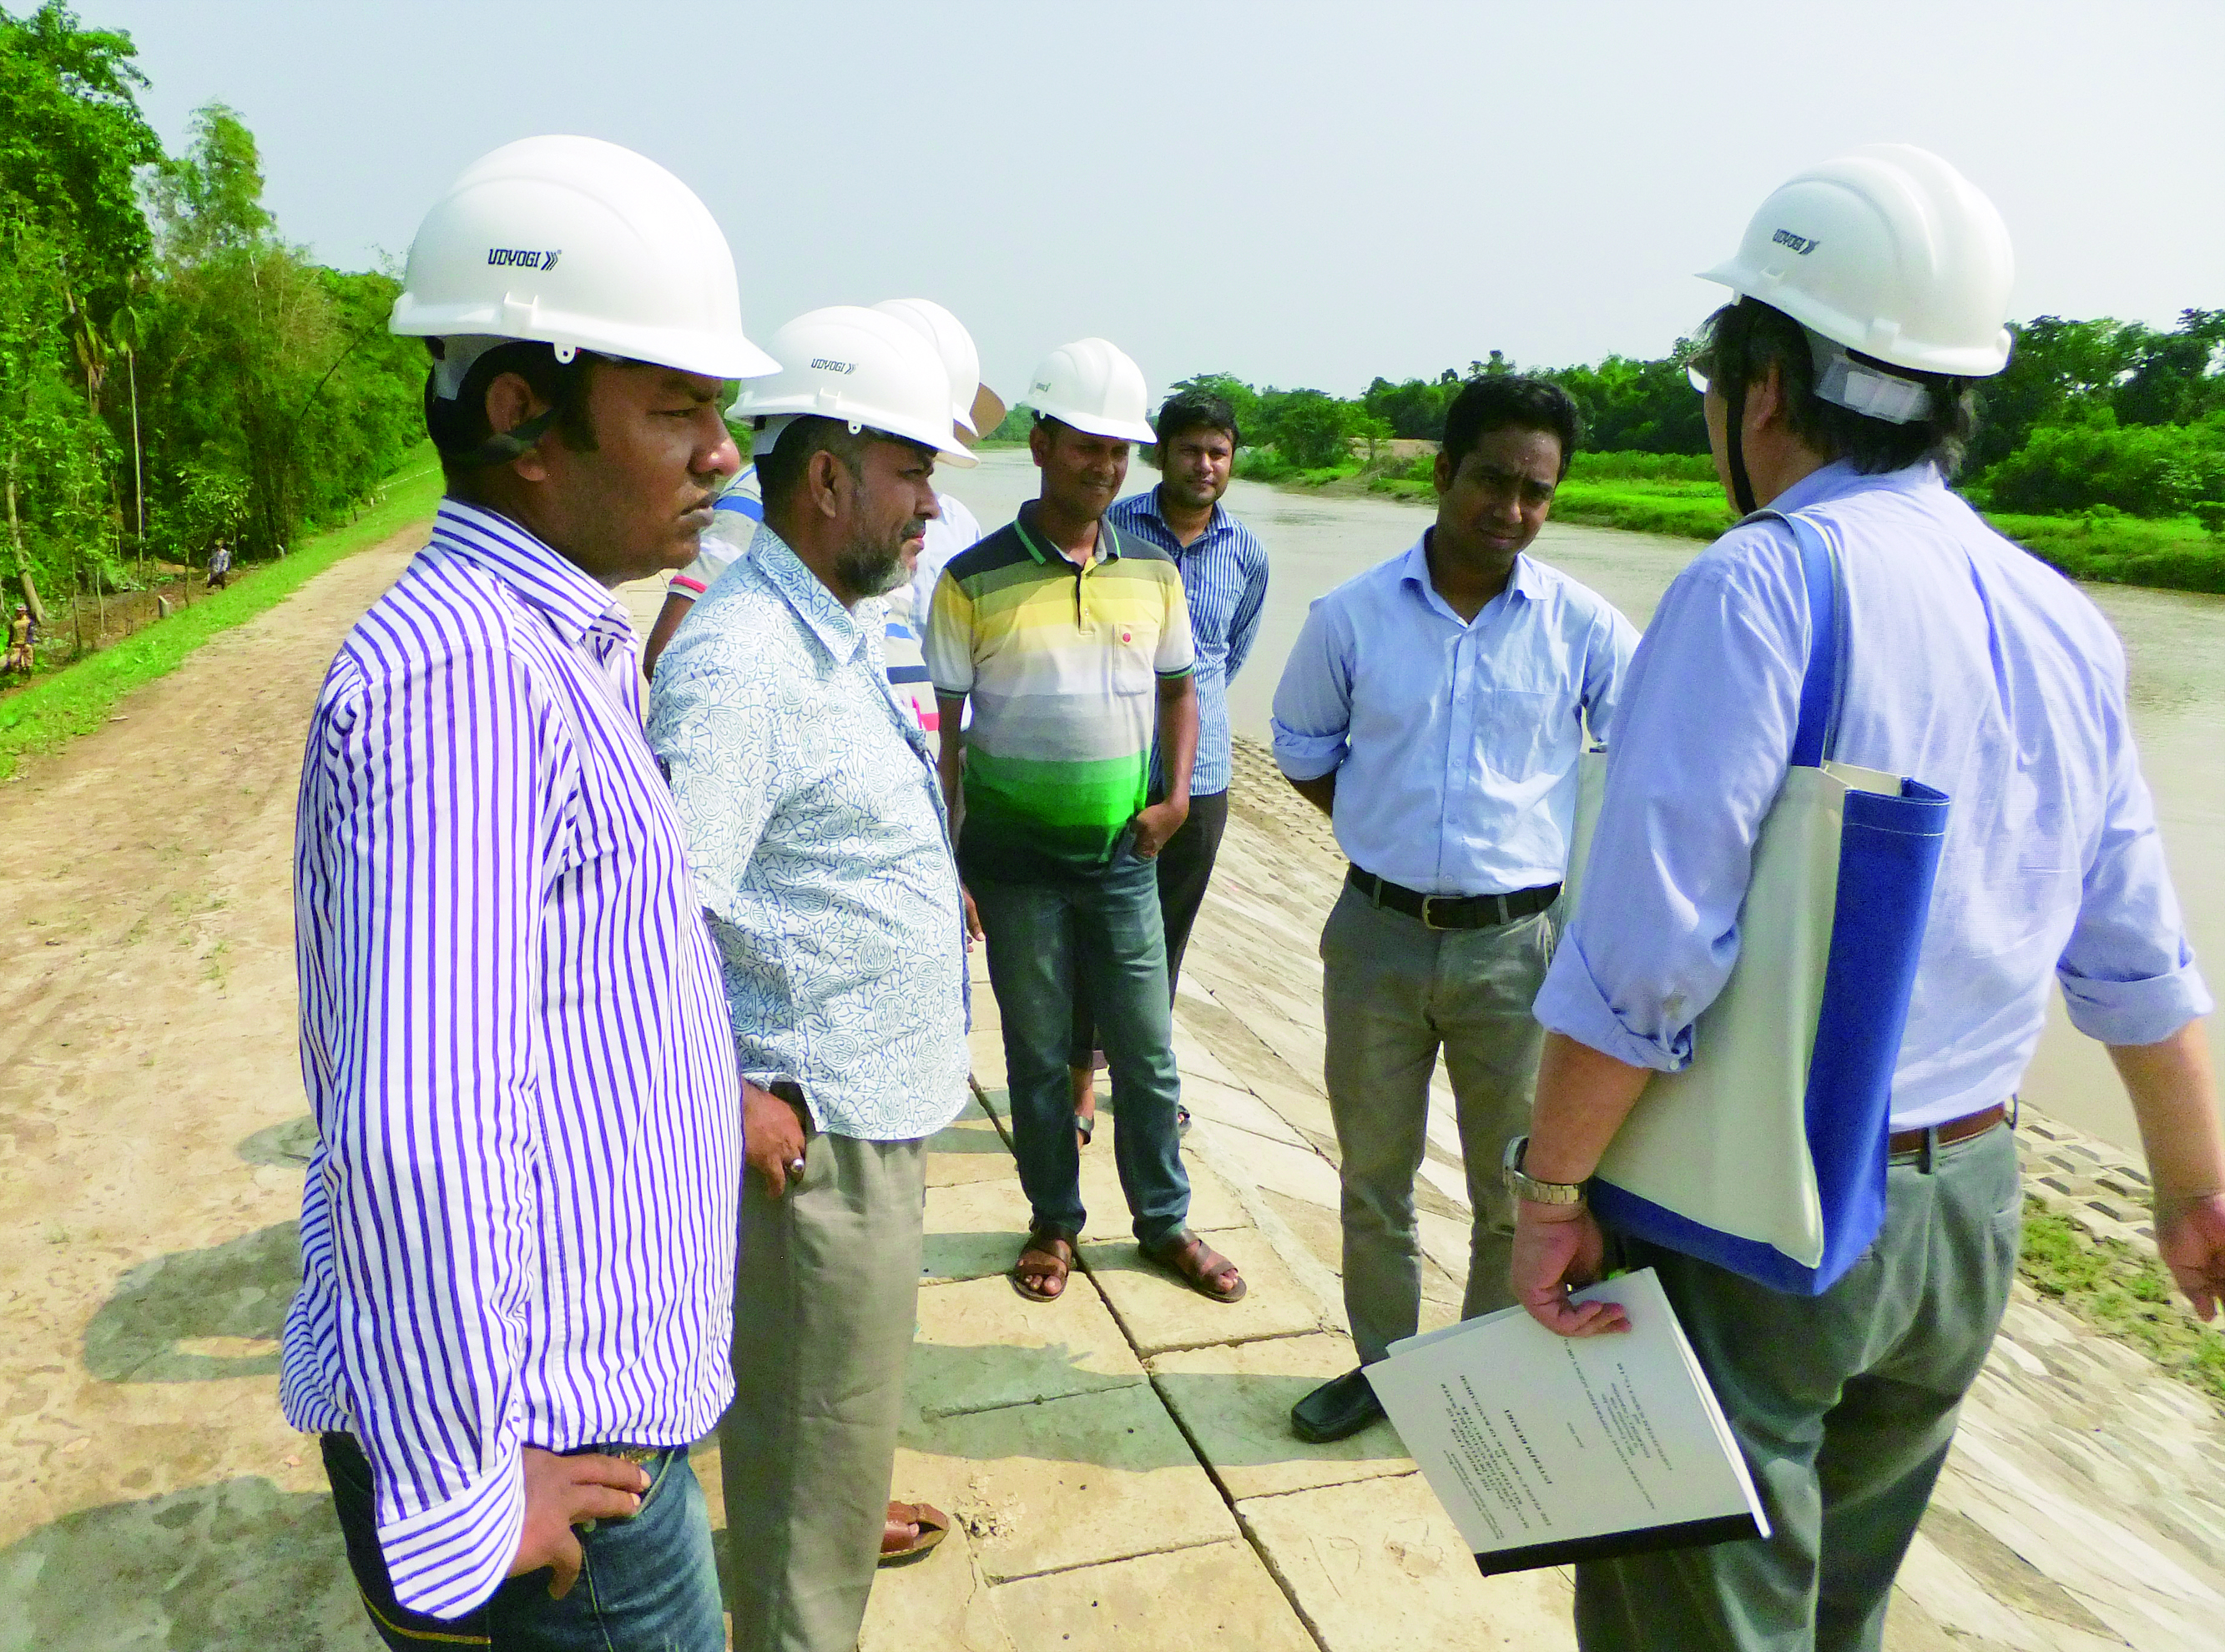 Field surveys of water-related infrastructure (Bangladesh)”